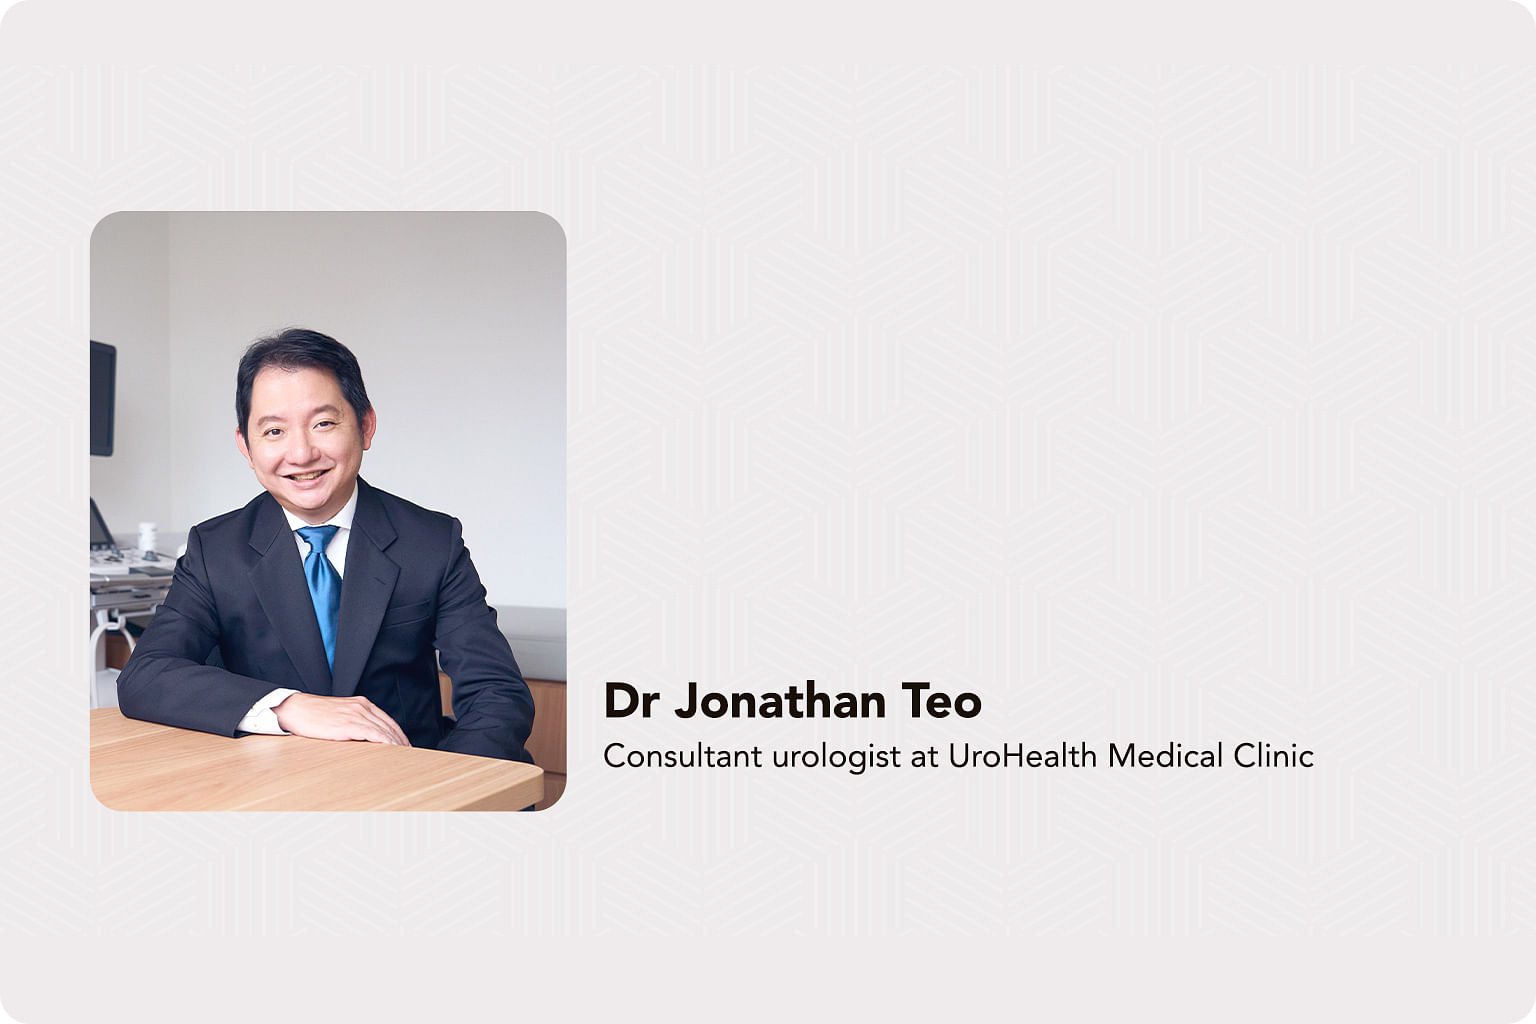 Dr Jonathan Teo Consultant urologist at UroHealth Medical Clinic